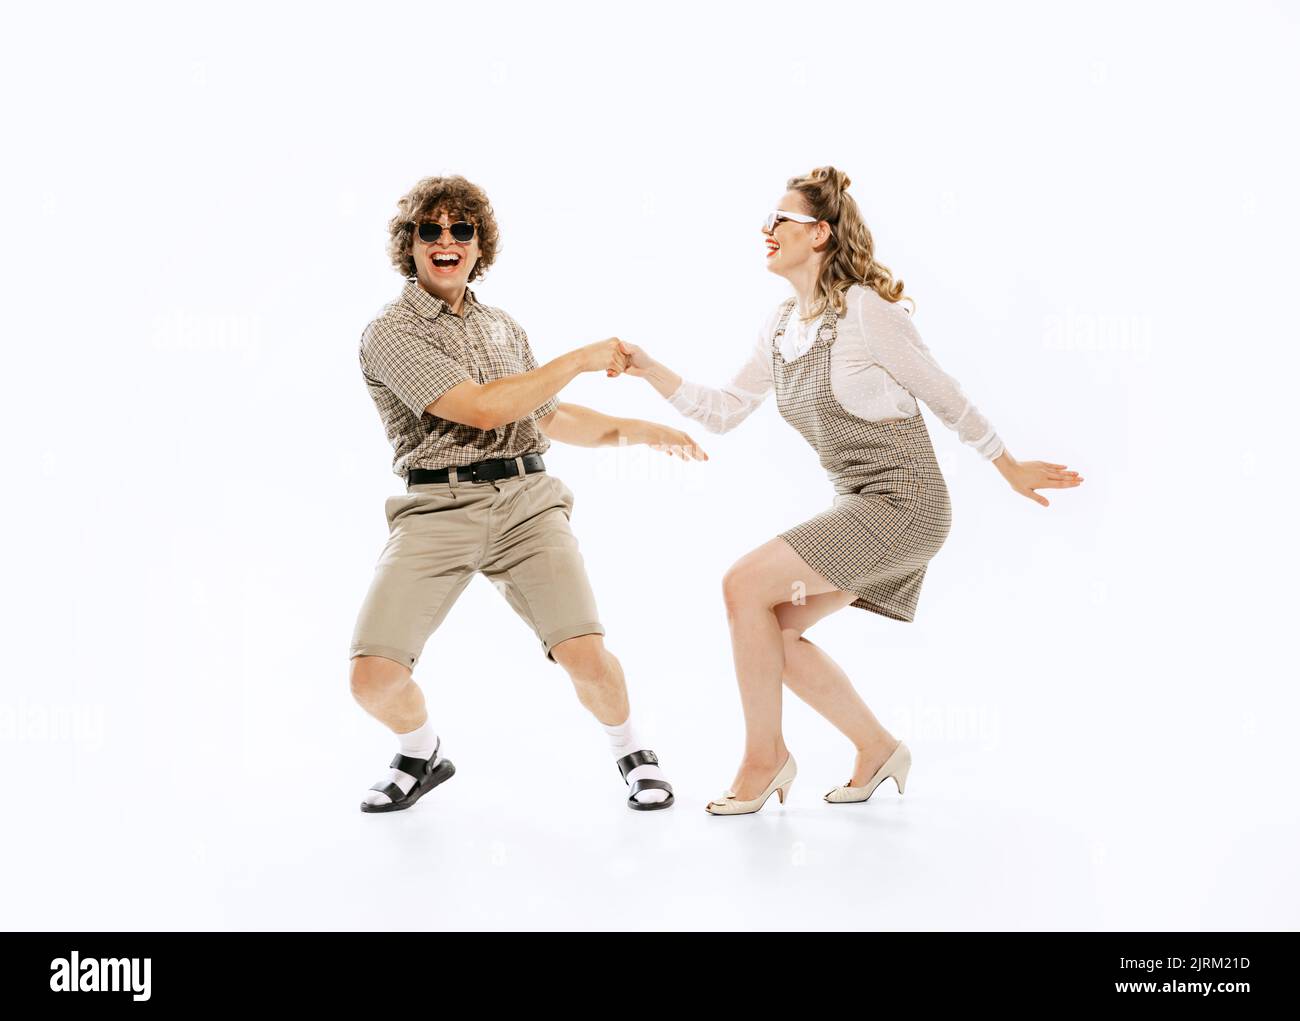 2,227 Couple Dancing Vintage Clothing Royalty-Free Photos and Stock Images  | Shutterstock